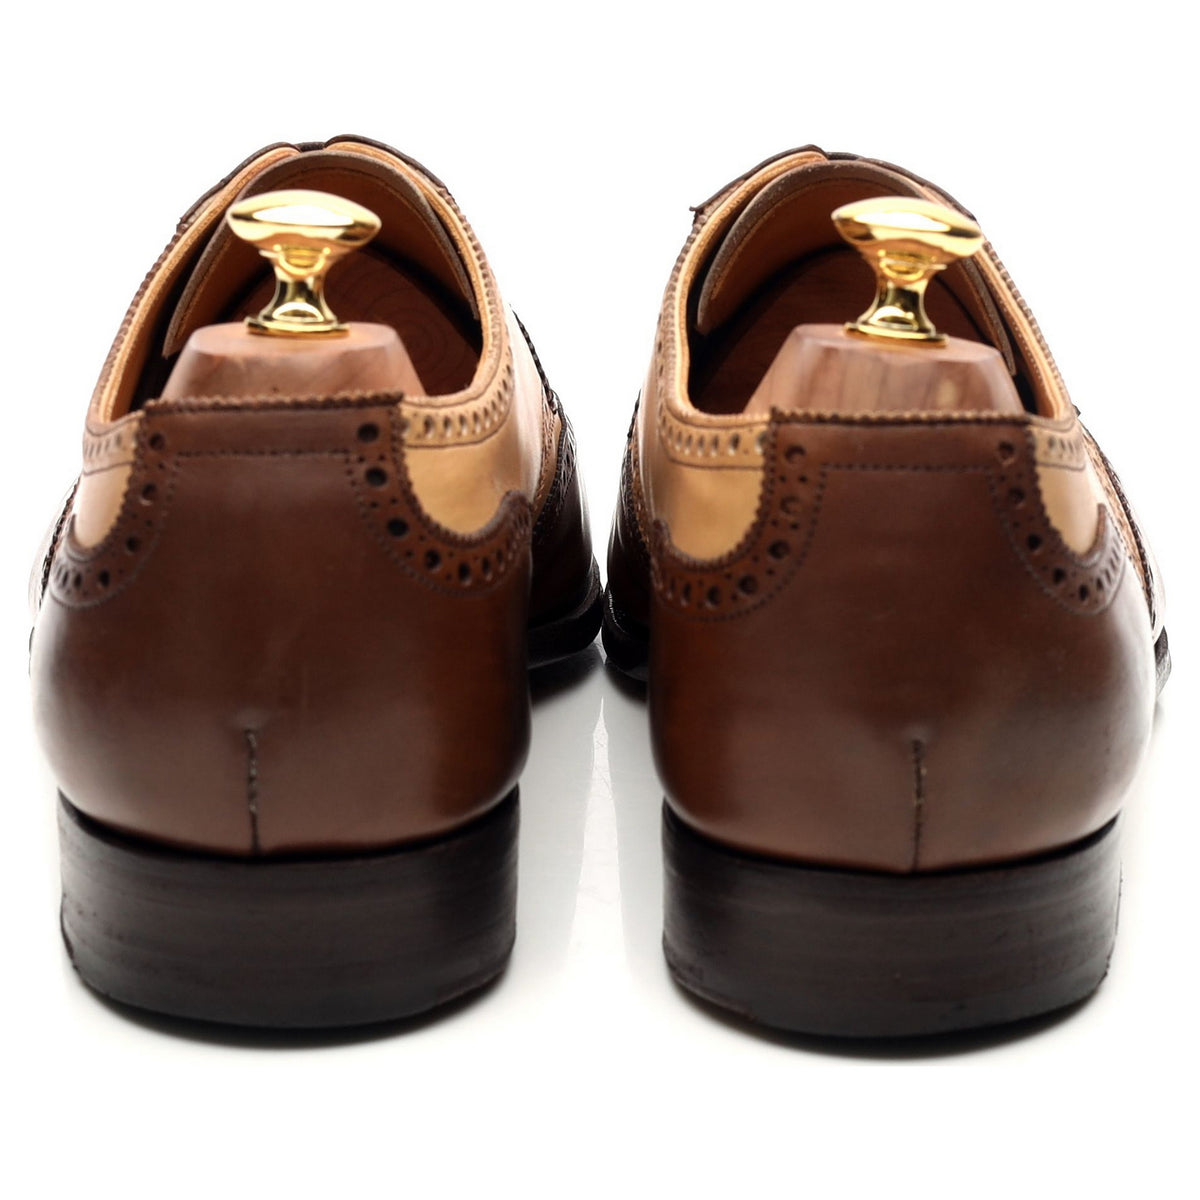 Brown Cream Two Tone Leather Derby Brogues UK 10 G